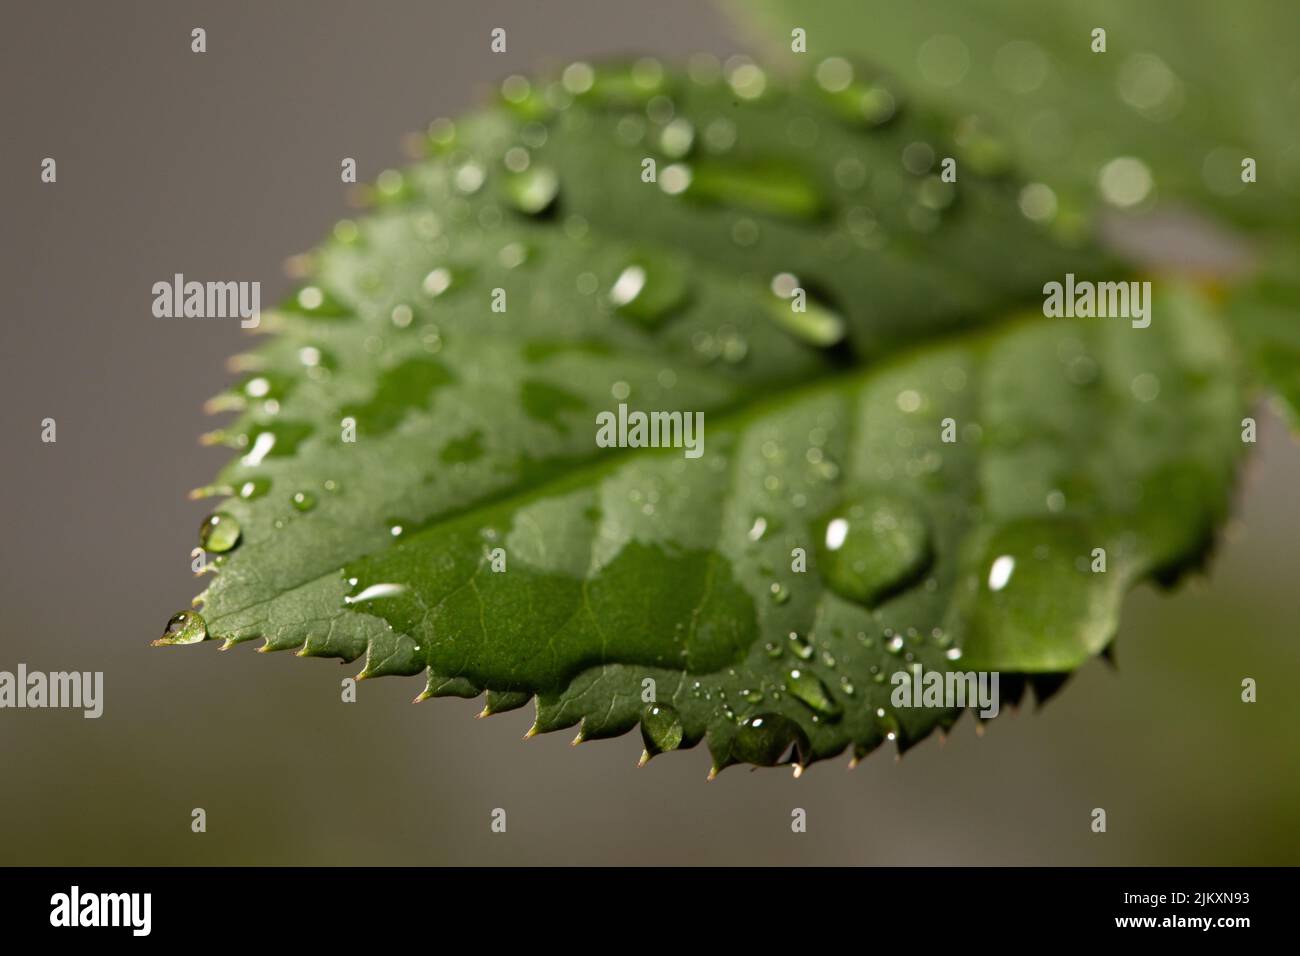 A closeup shot of a green leaf with water droplets on it Stock Photo